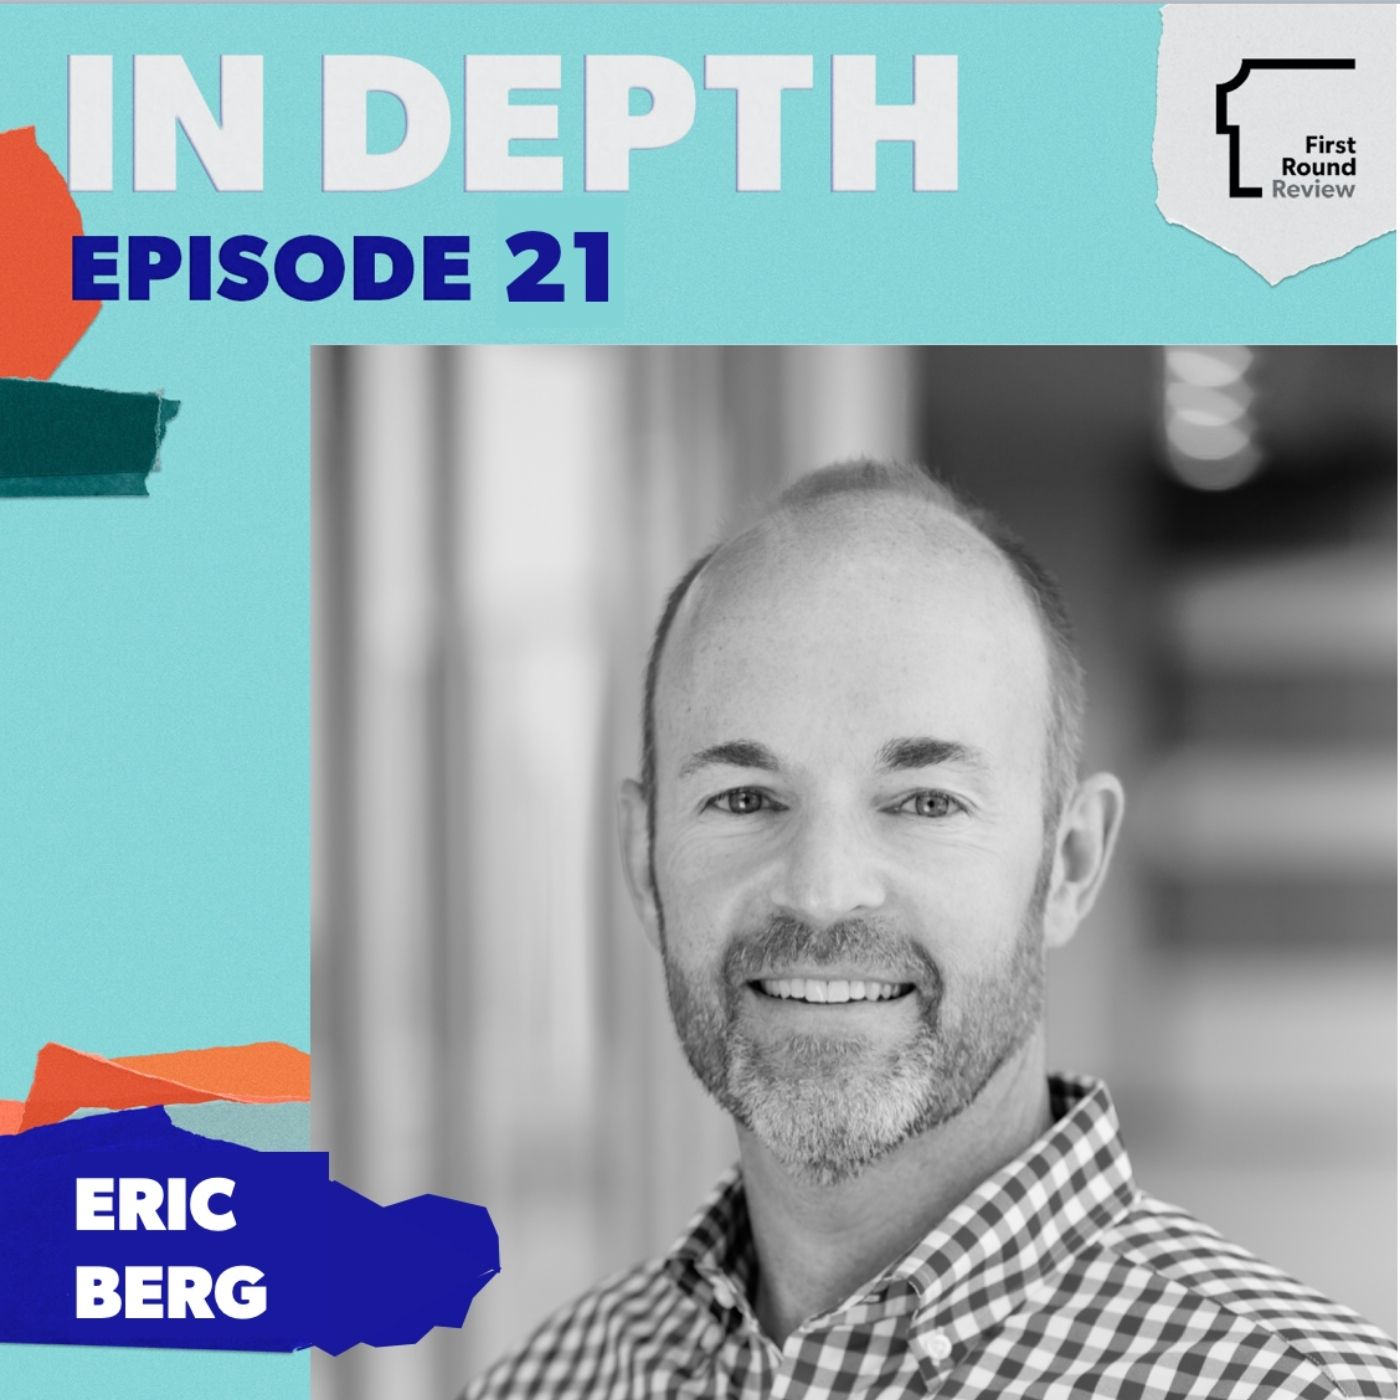 Product Pitfalls From 0 Customers to the Messy Middle and IPO — Eric Berg on Okta, Intel & Fauna